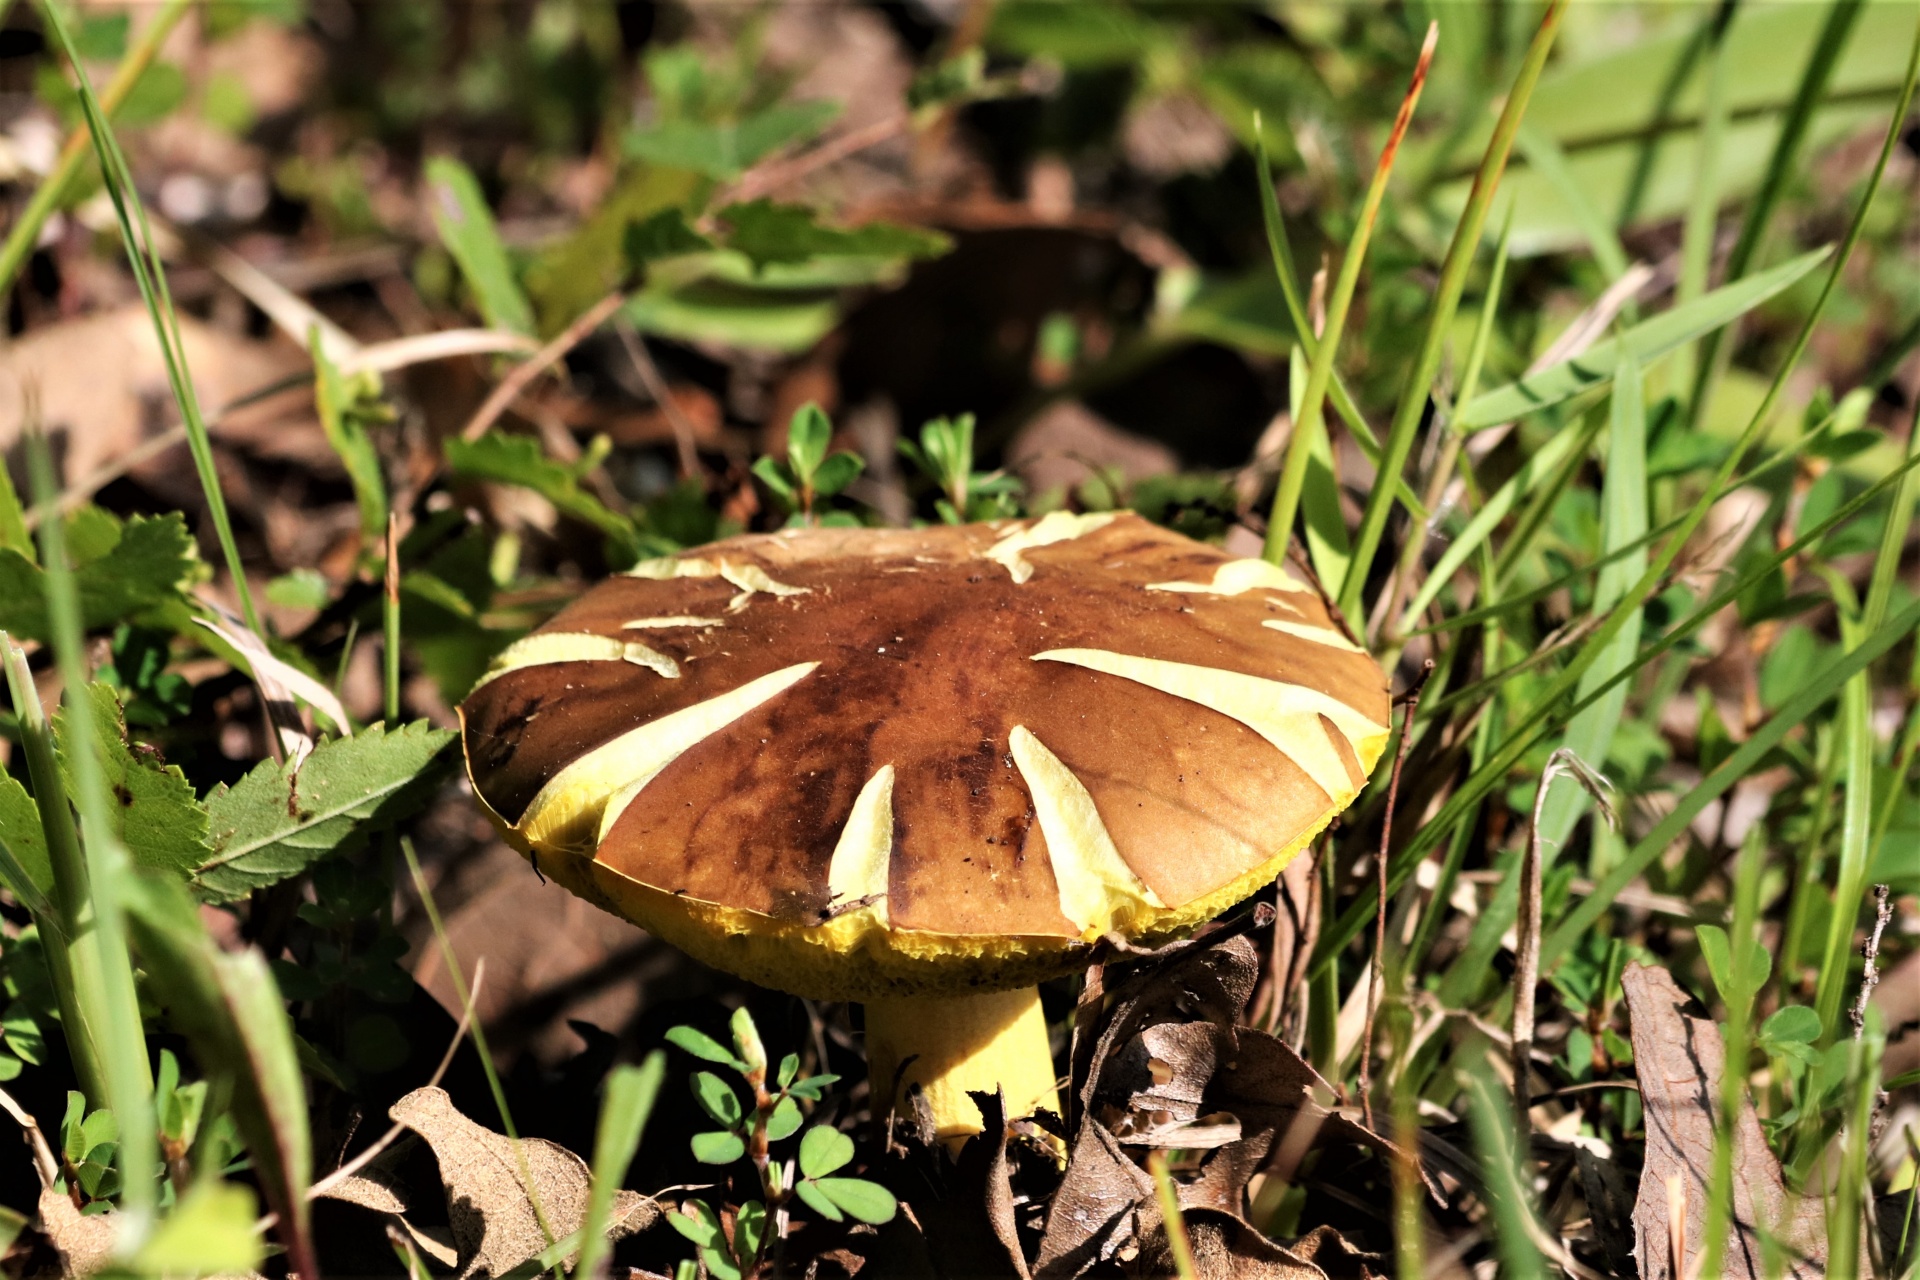 Close-up of a brown and white bolete mushroom growing in a grassy field.